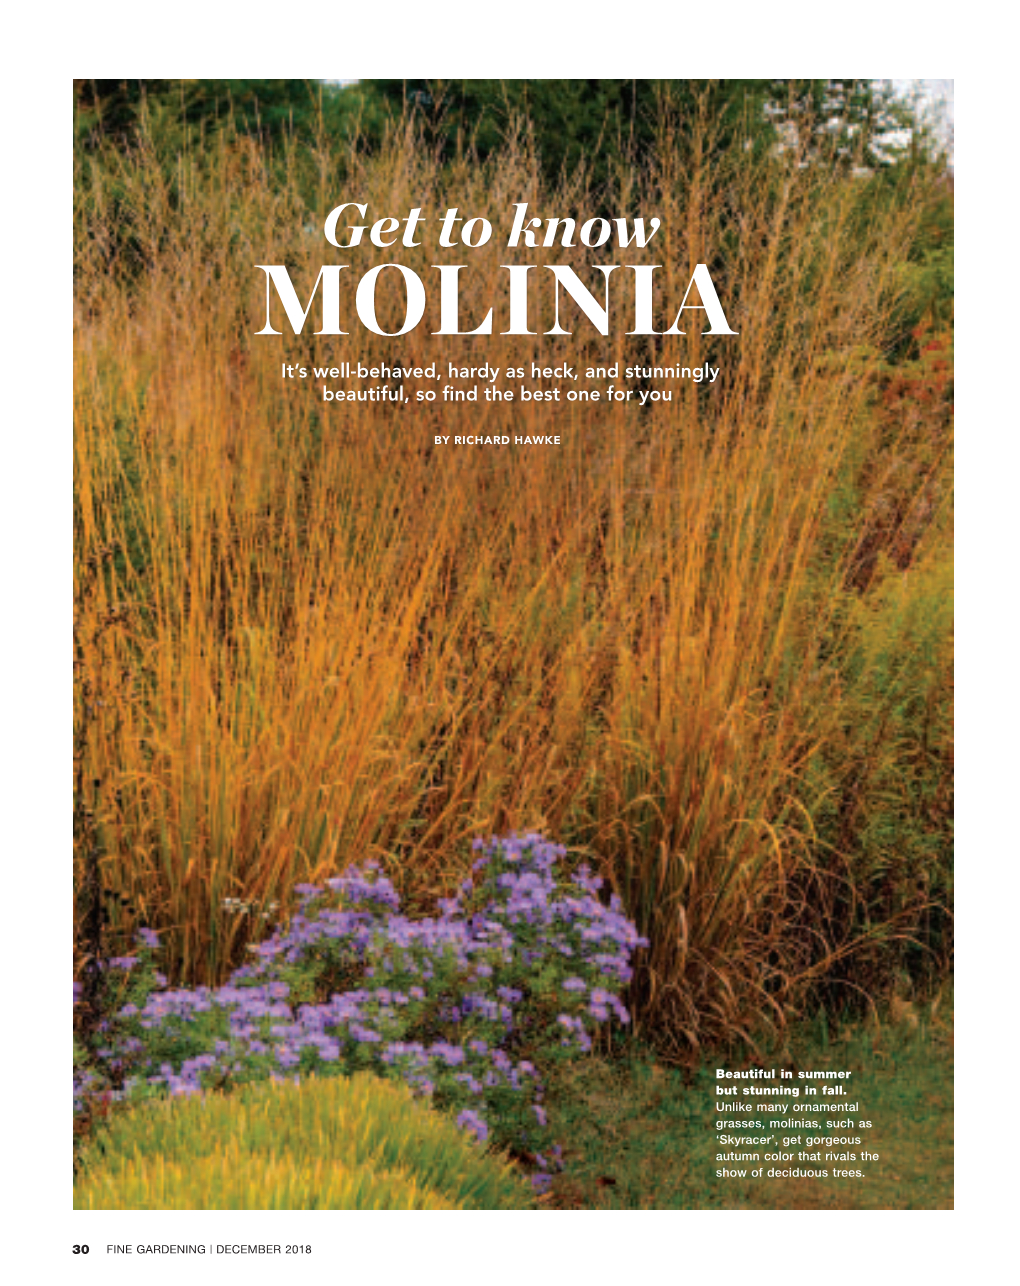 Molinia It’S Well-Behaved, Hardy As Heck, and Stunningly Beautiful, So Find the Best One for You